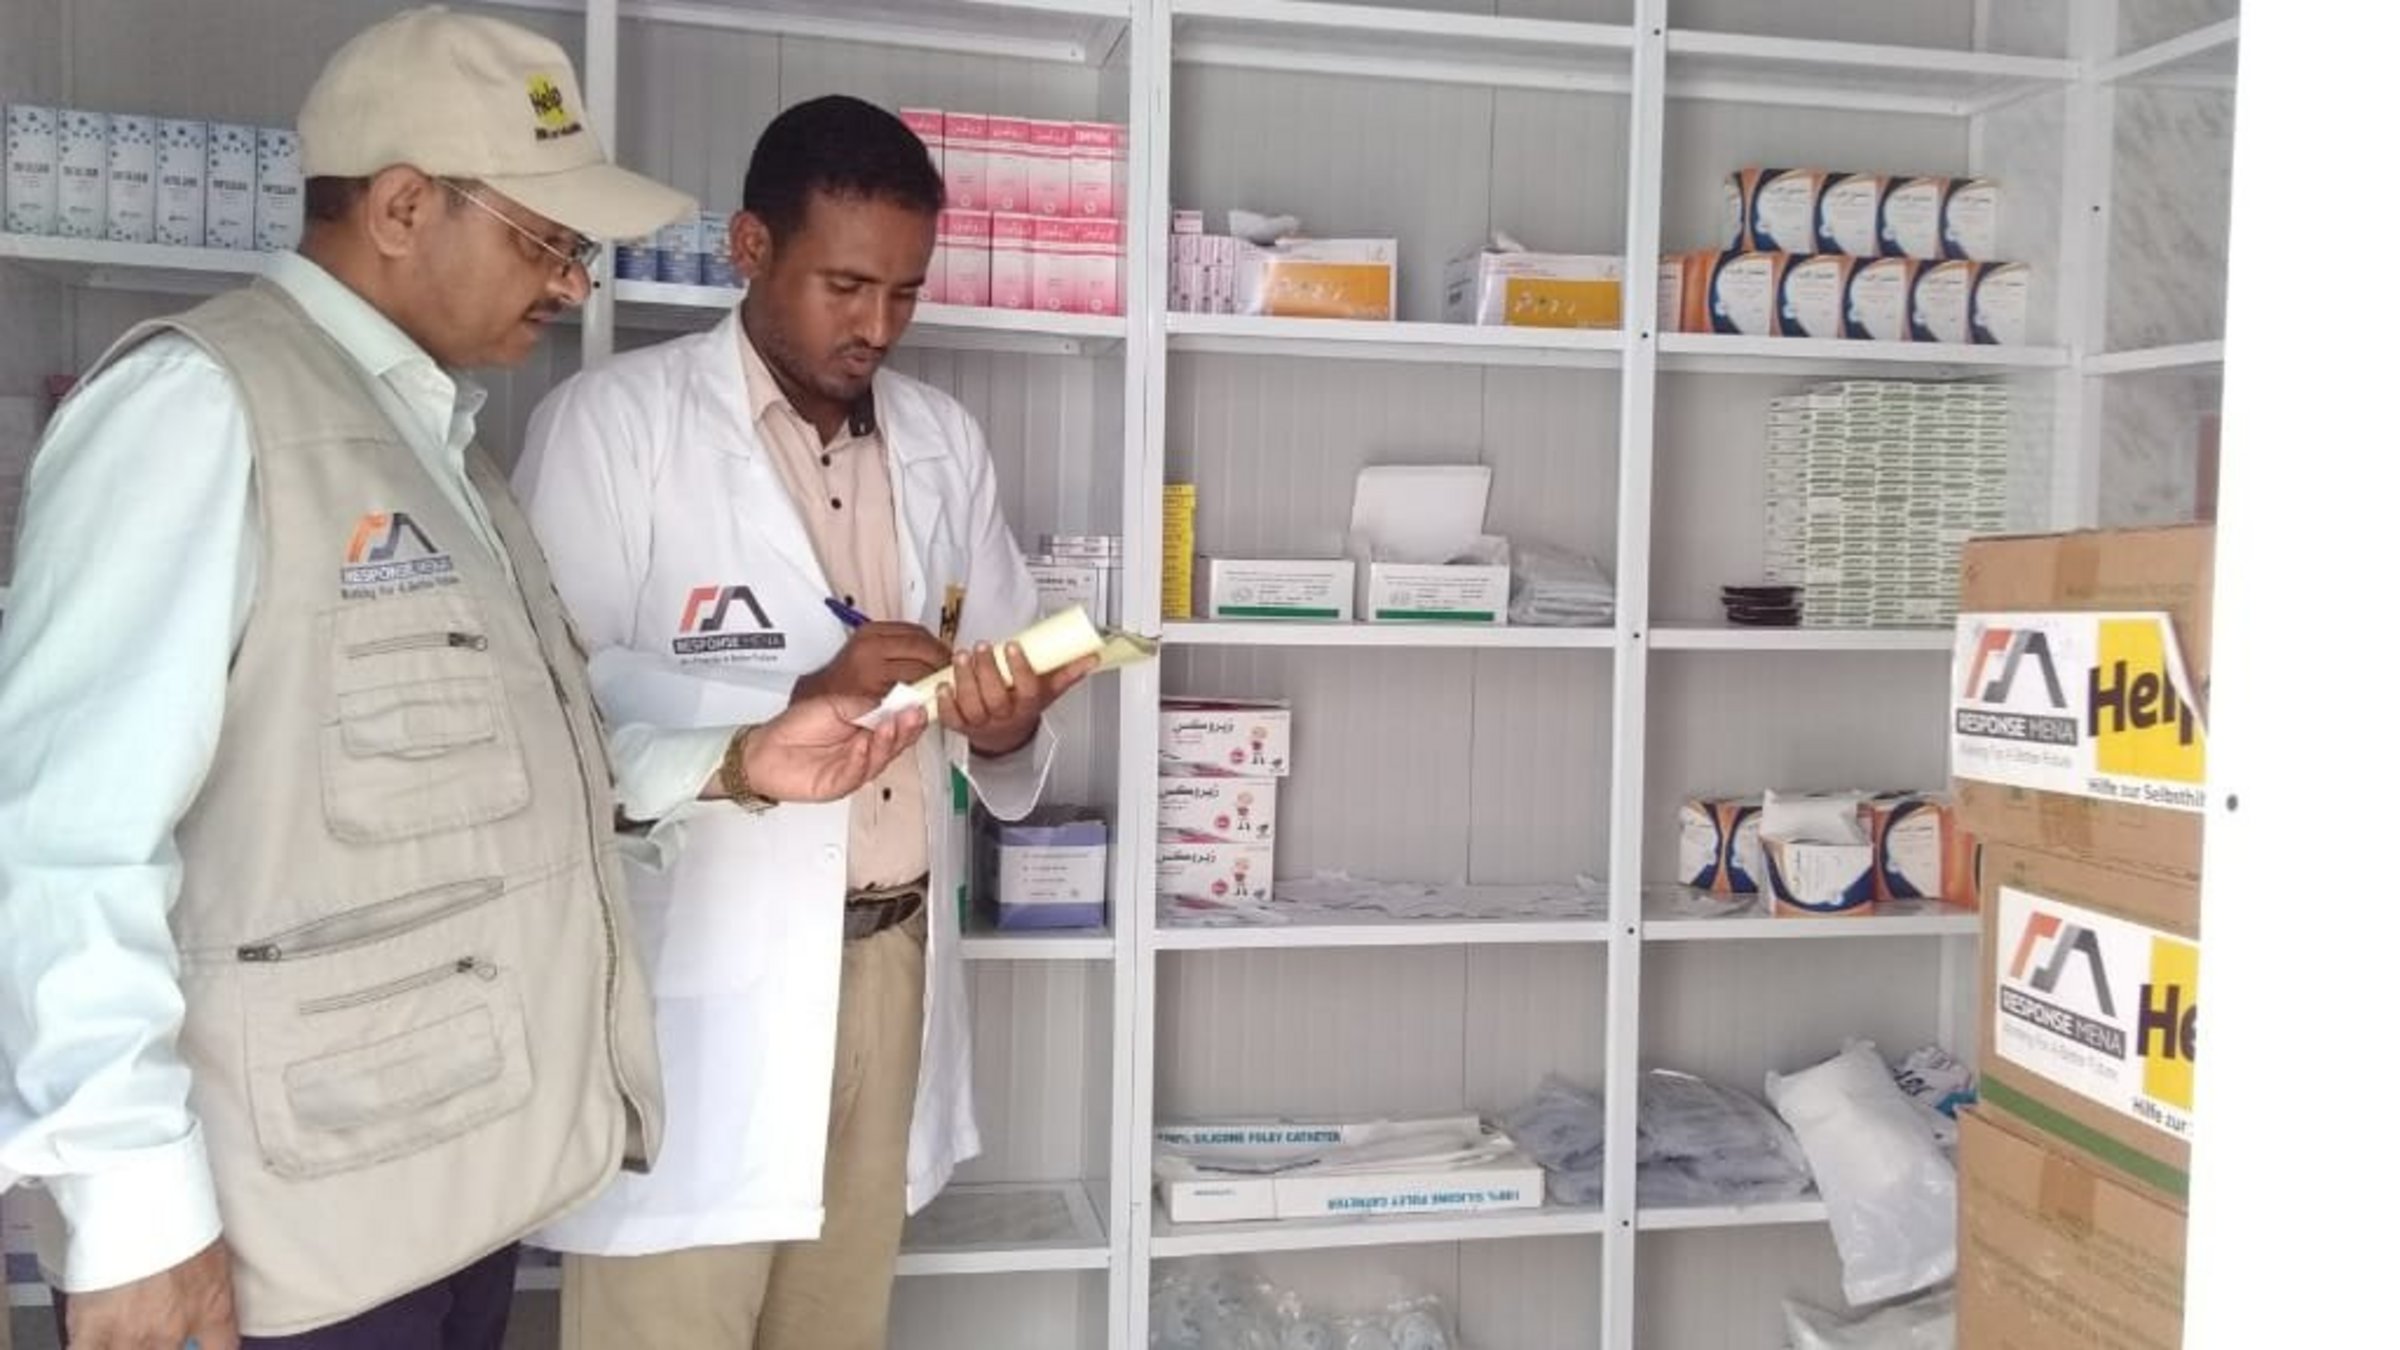 The Help team checks the stock of medicines in one of our health centers.